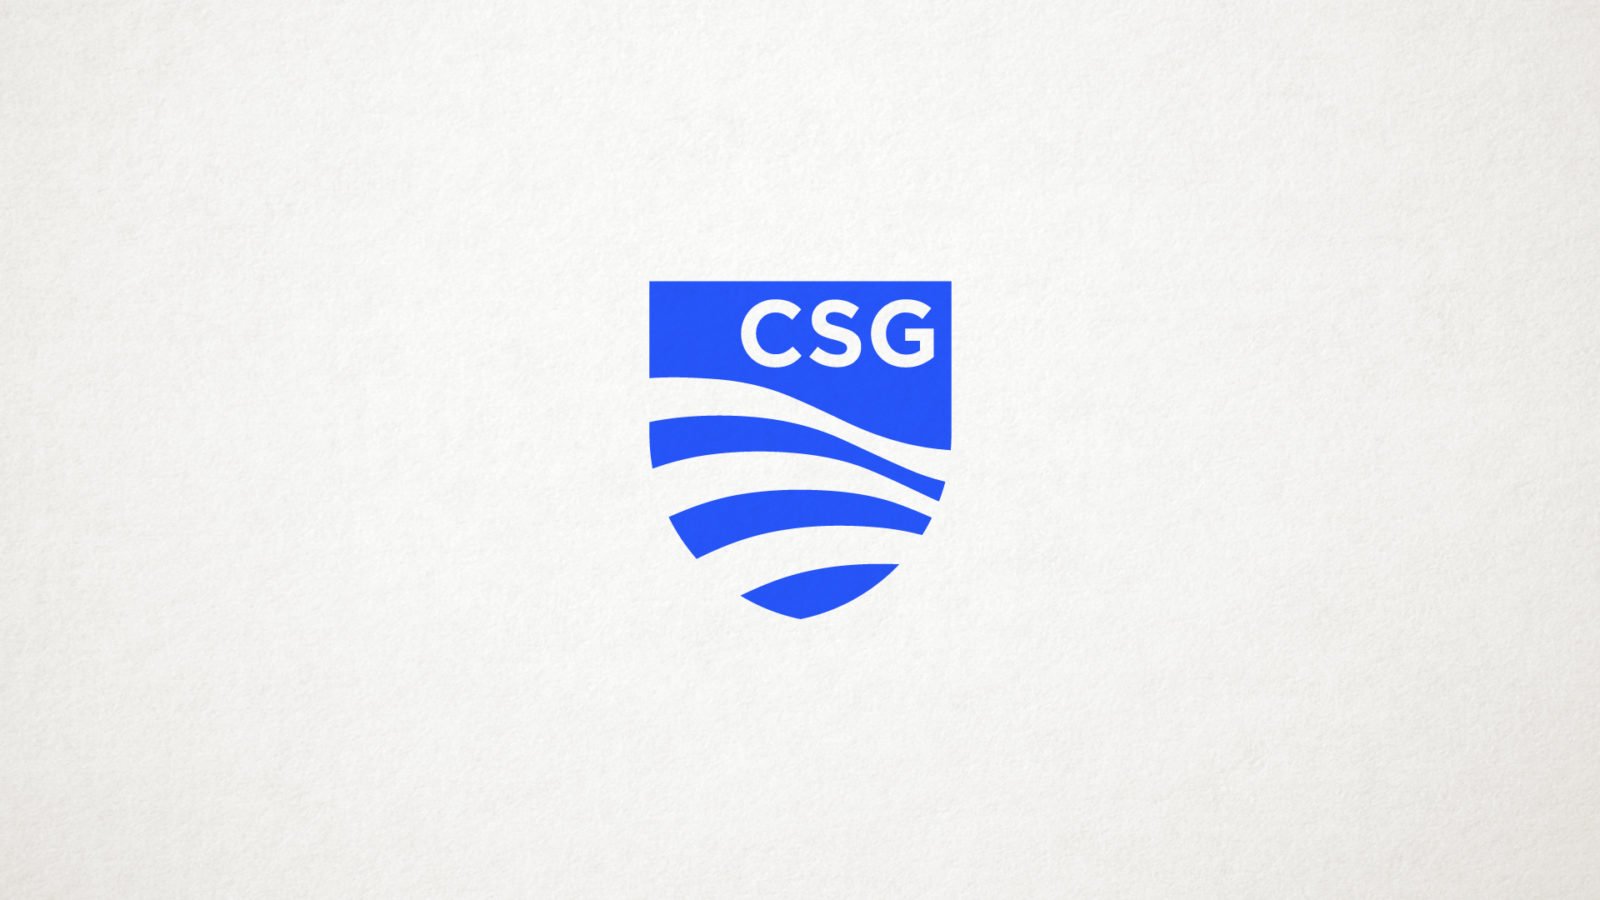 Brand identity for The Council of State Governments